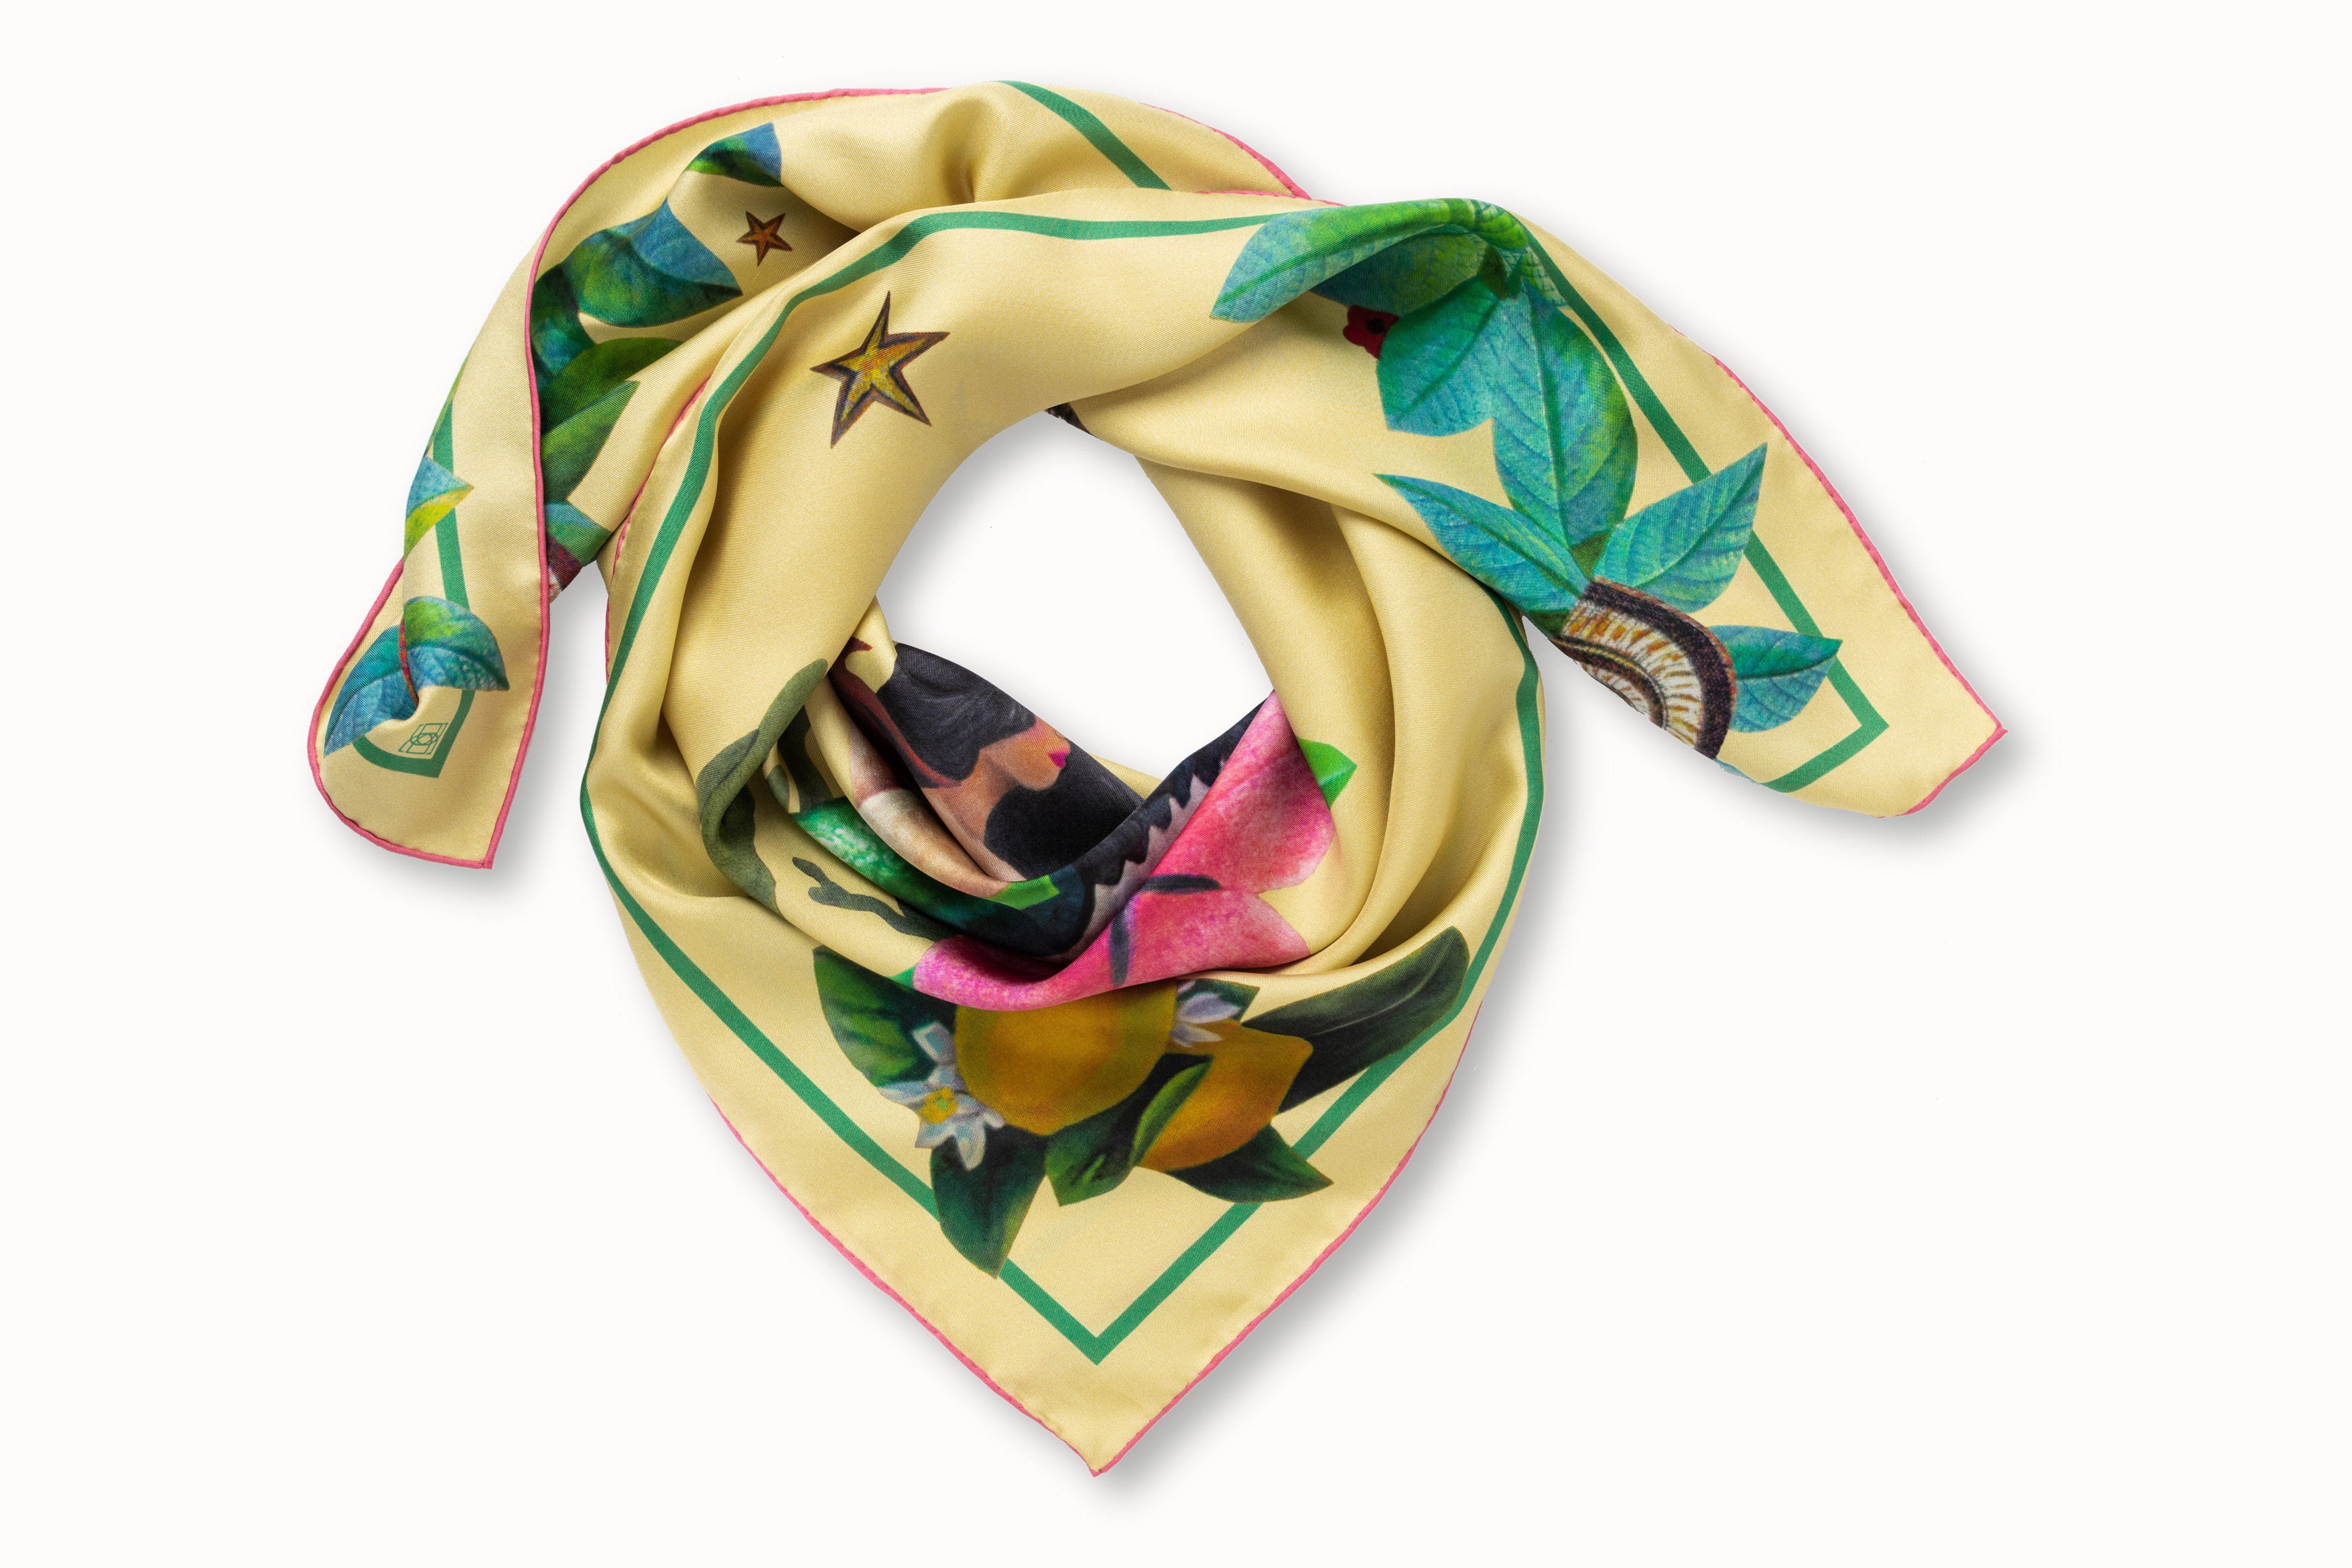 Rolled image of 100% silk square scarf featuring two painted two mermaids resting on large sea shells, a pink flower and green seaweed on a lemon yellow background with small butterfly accents. Thin green border around the edges of the scarf, layered with green leaves, seashells and lemons.